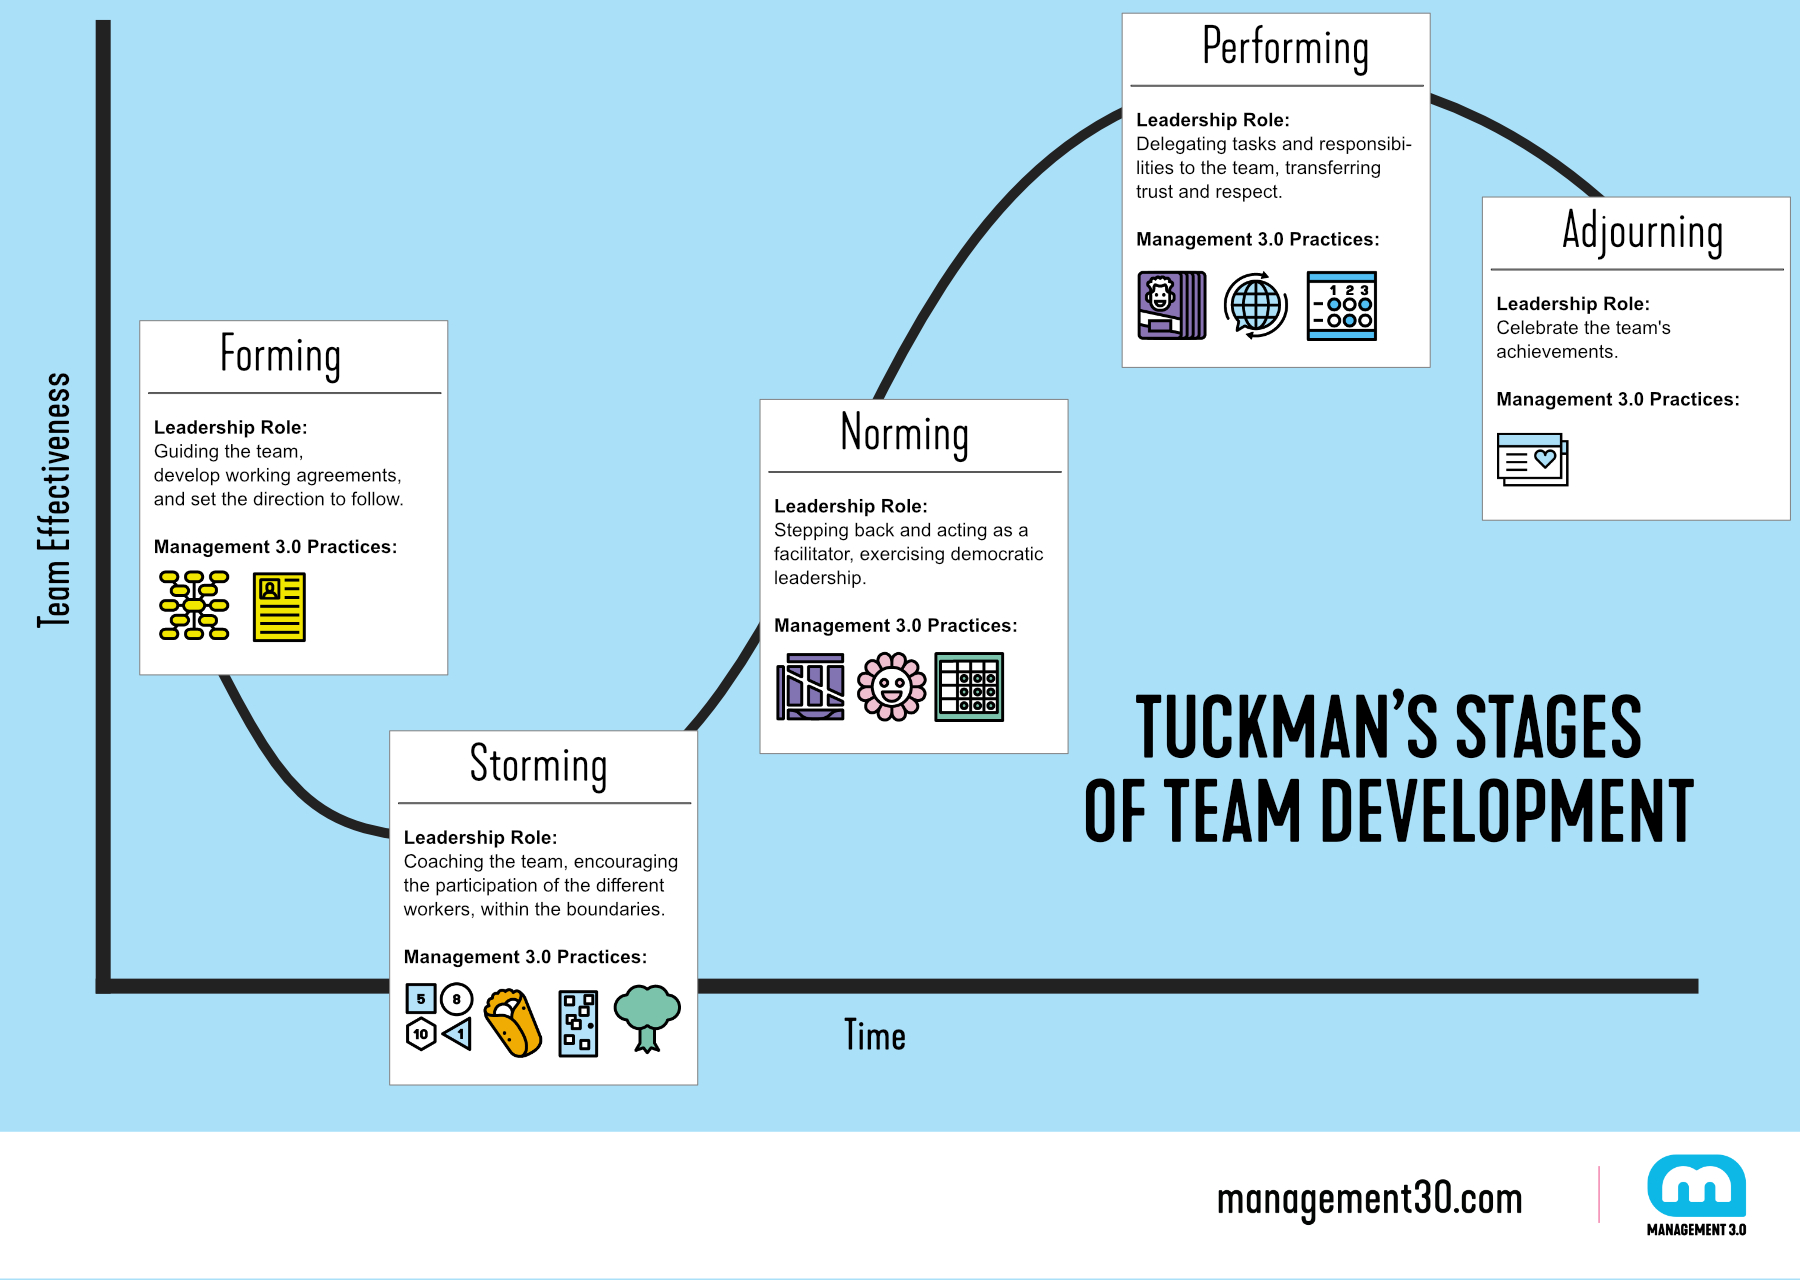 Tuckman Model and Management 3.0